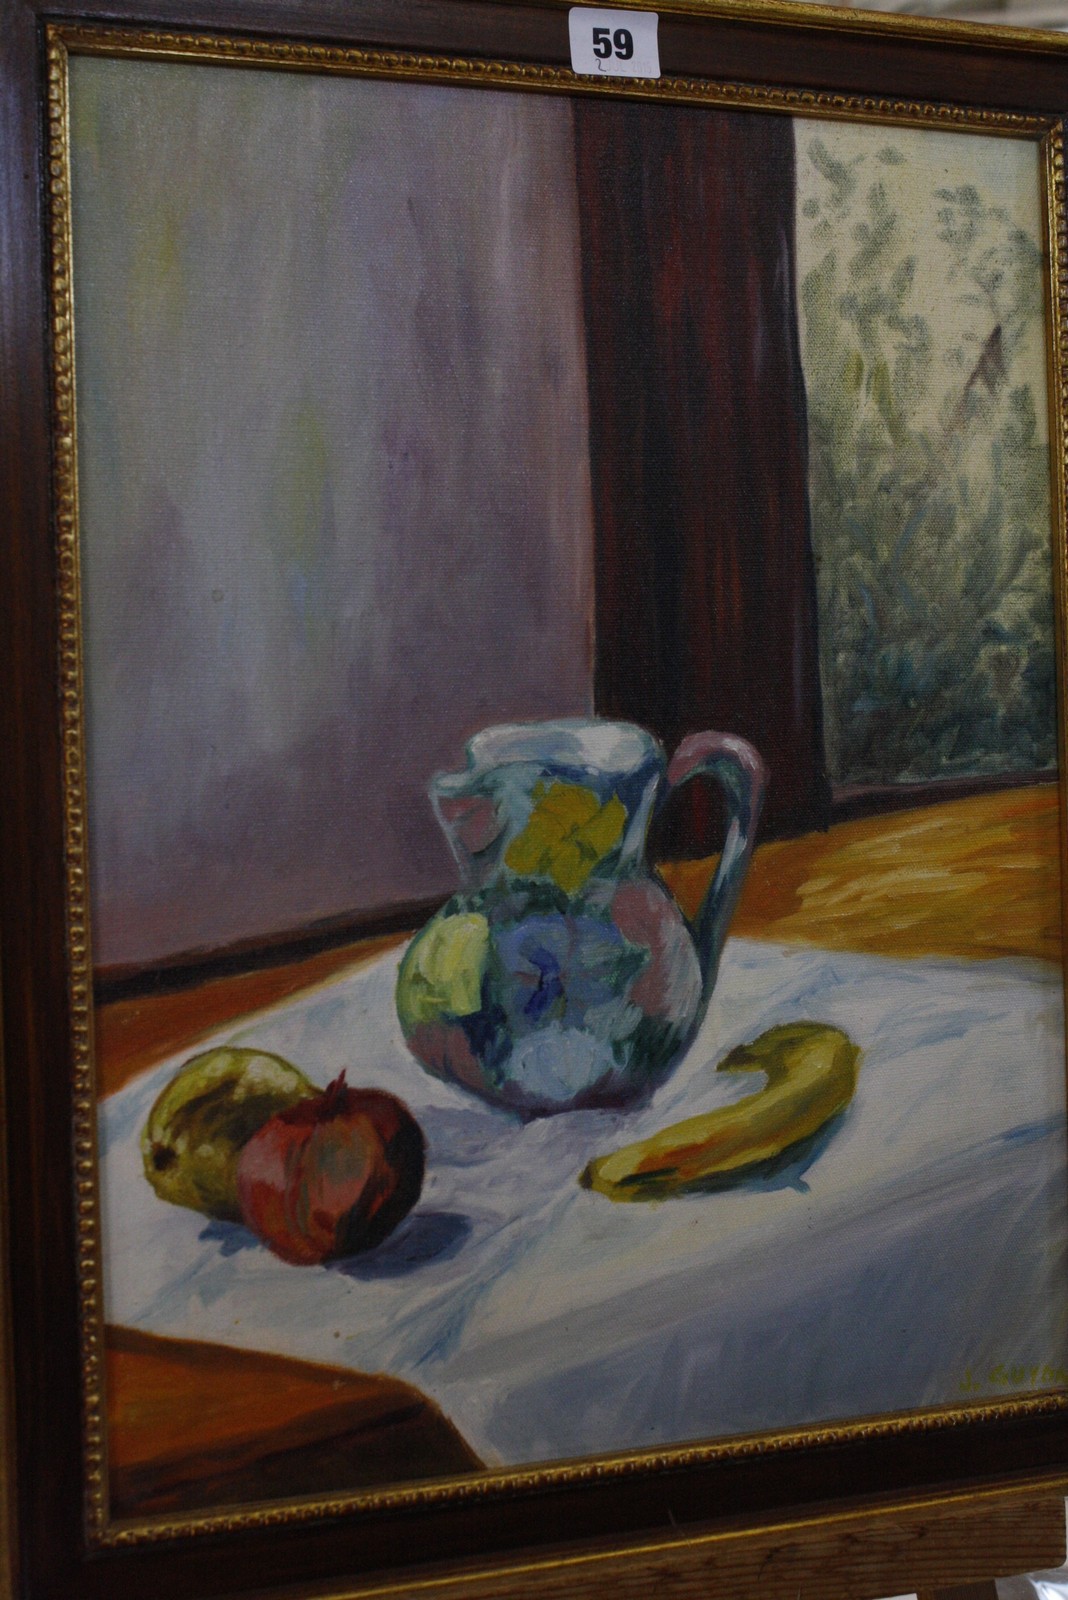 Janet Hygen (20th Century)  A still life of a jug, banana and two apples  Oil on canvas  Signed